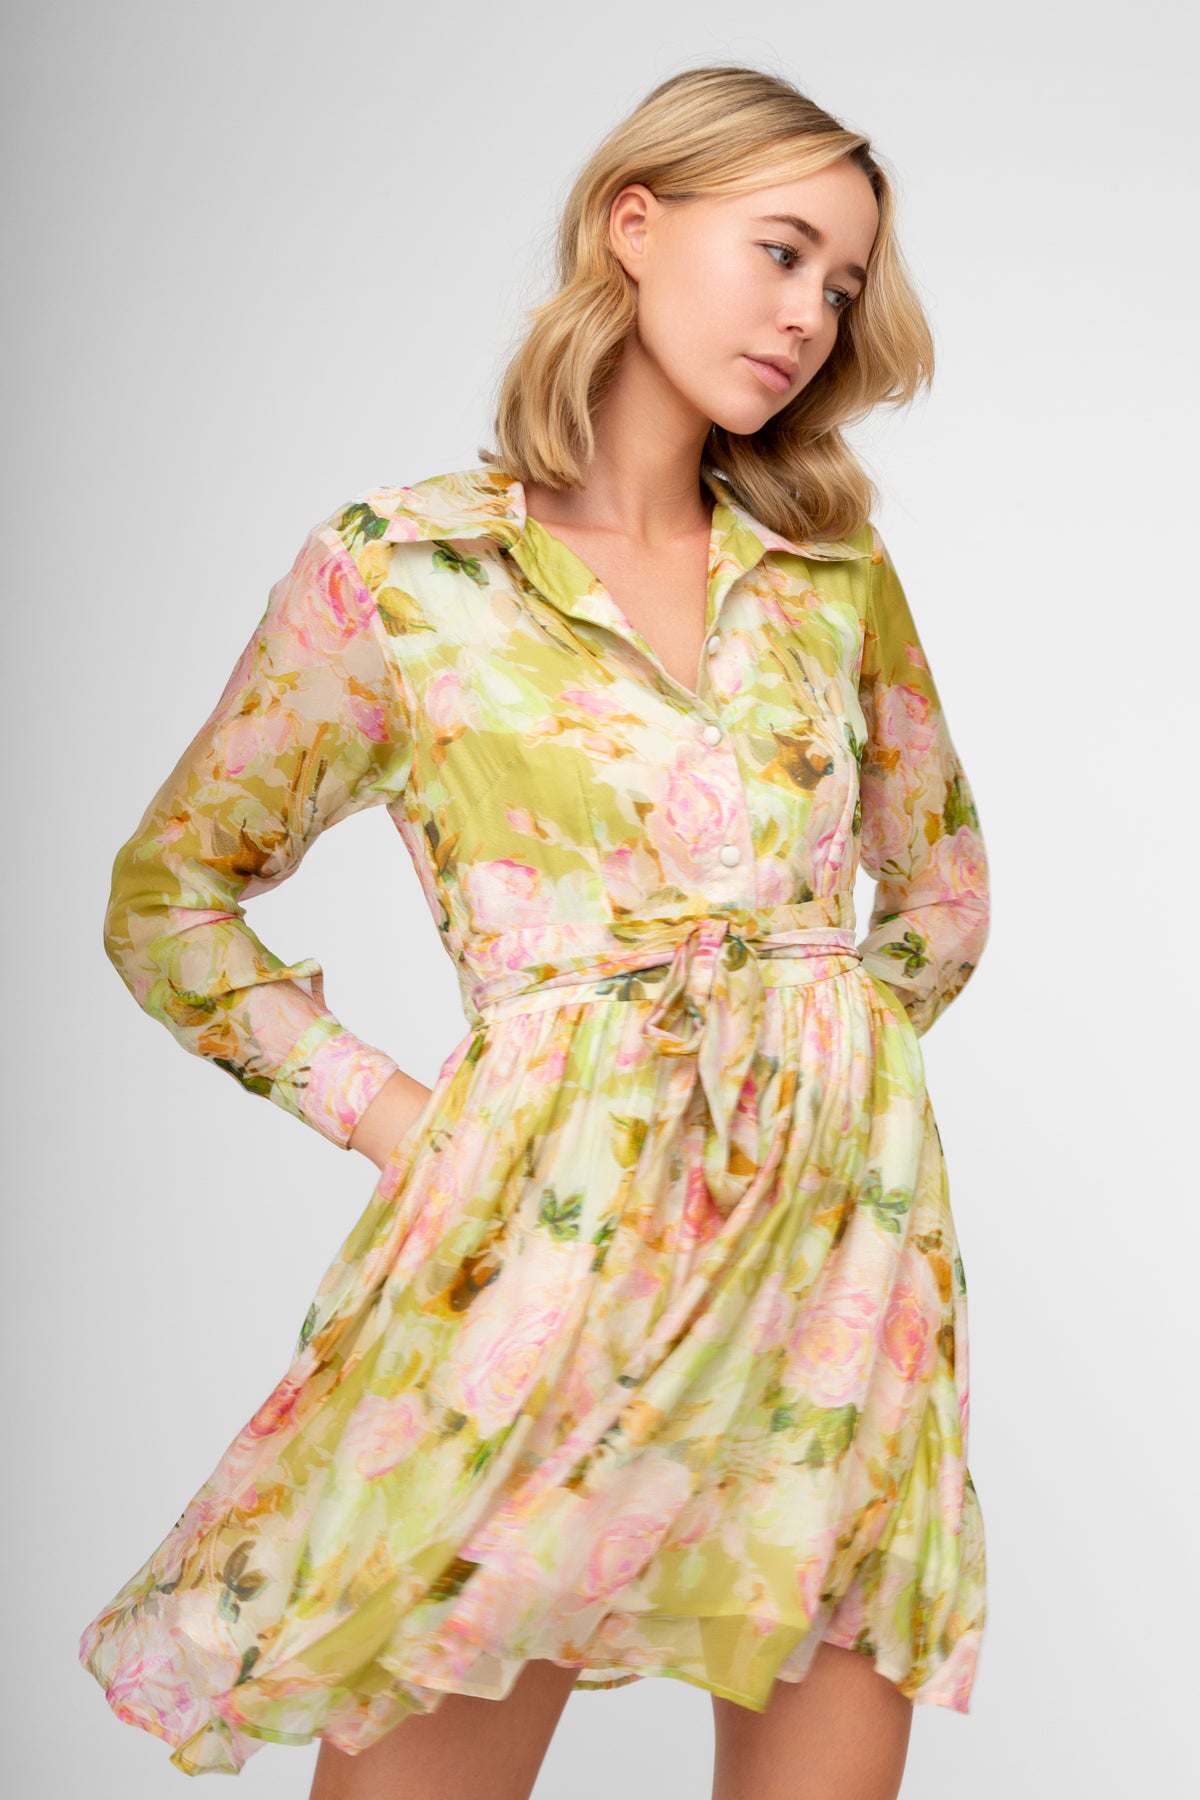 yellow and green floral dress